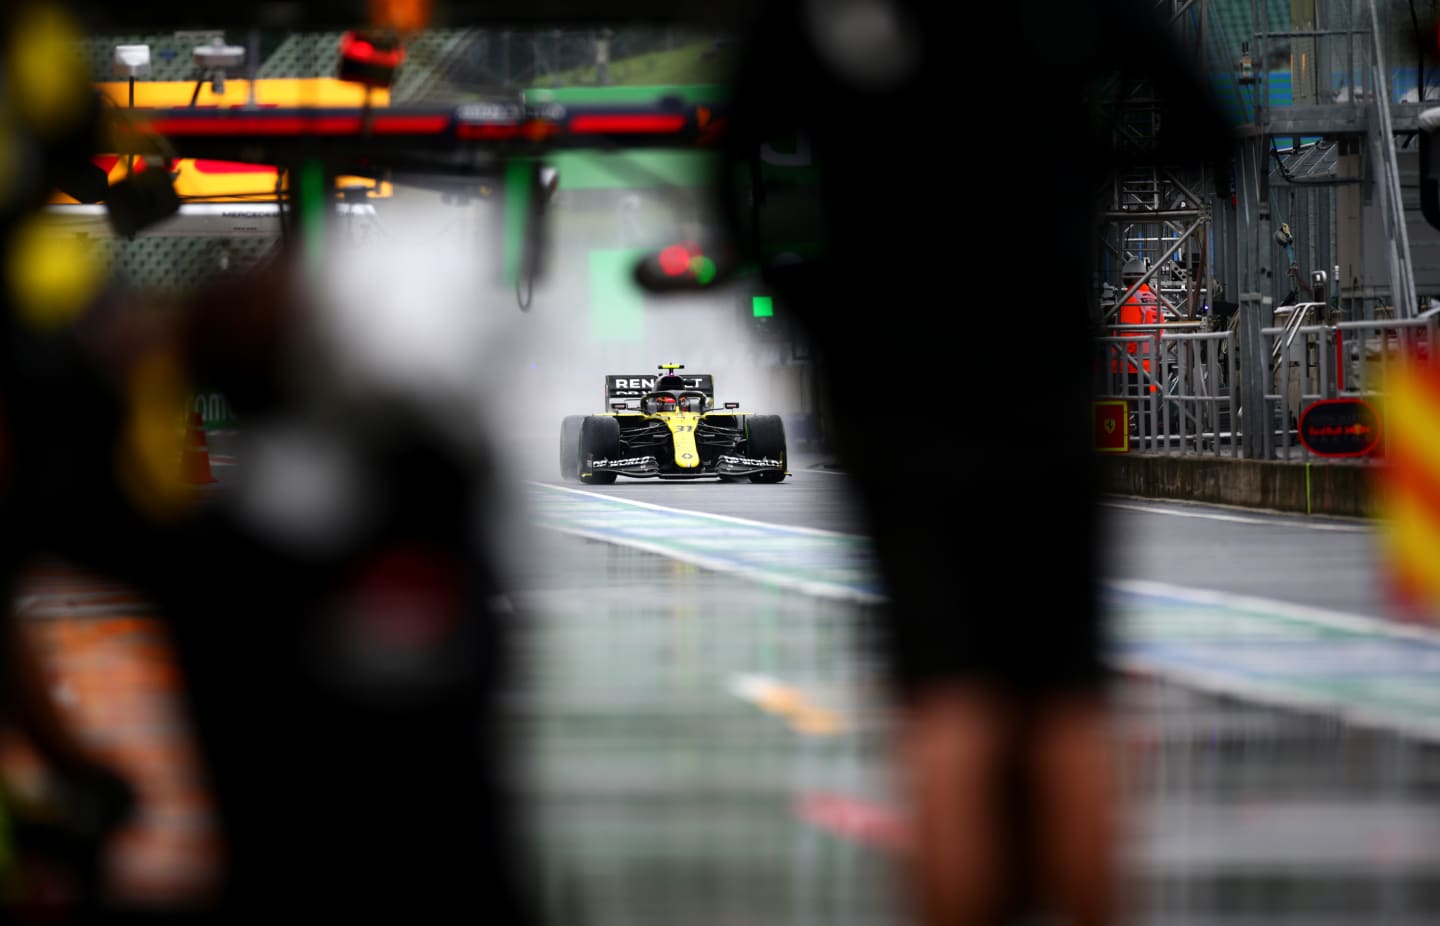 BUDAPEST, HUNGARY - JULY 17: Esteban Ocon of France driving the (31) Renault Sport Formula One Team RS20 drives in the pit lane during practice for the F1 Grand Prix of Hungary at Hungaroring on July 17, 2020 in Budapest, Hungary. (Photo by Peter Fox/Getty Images)